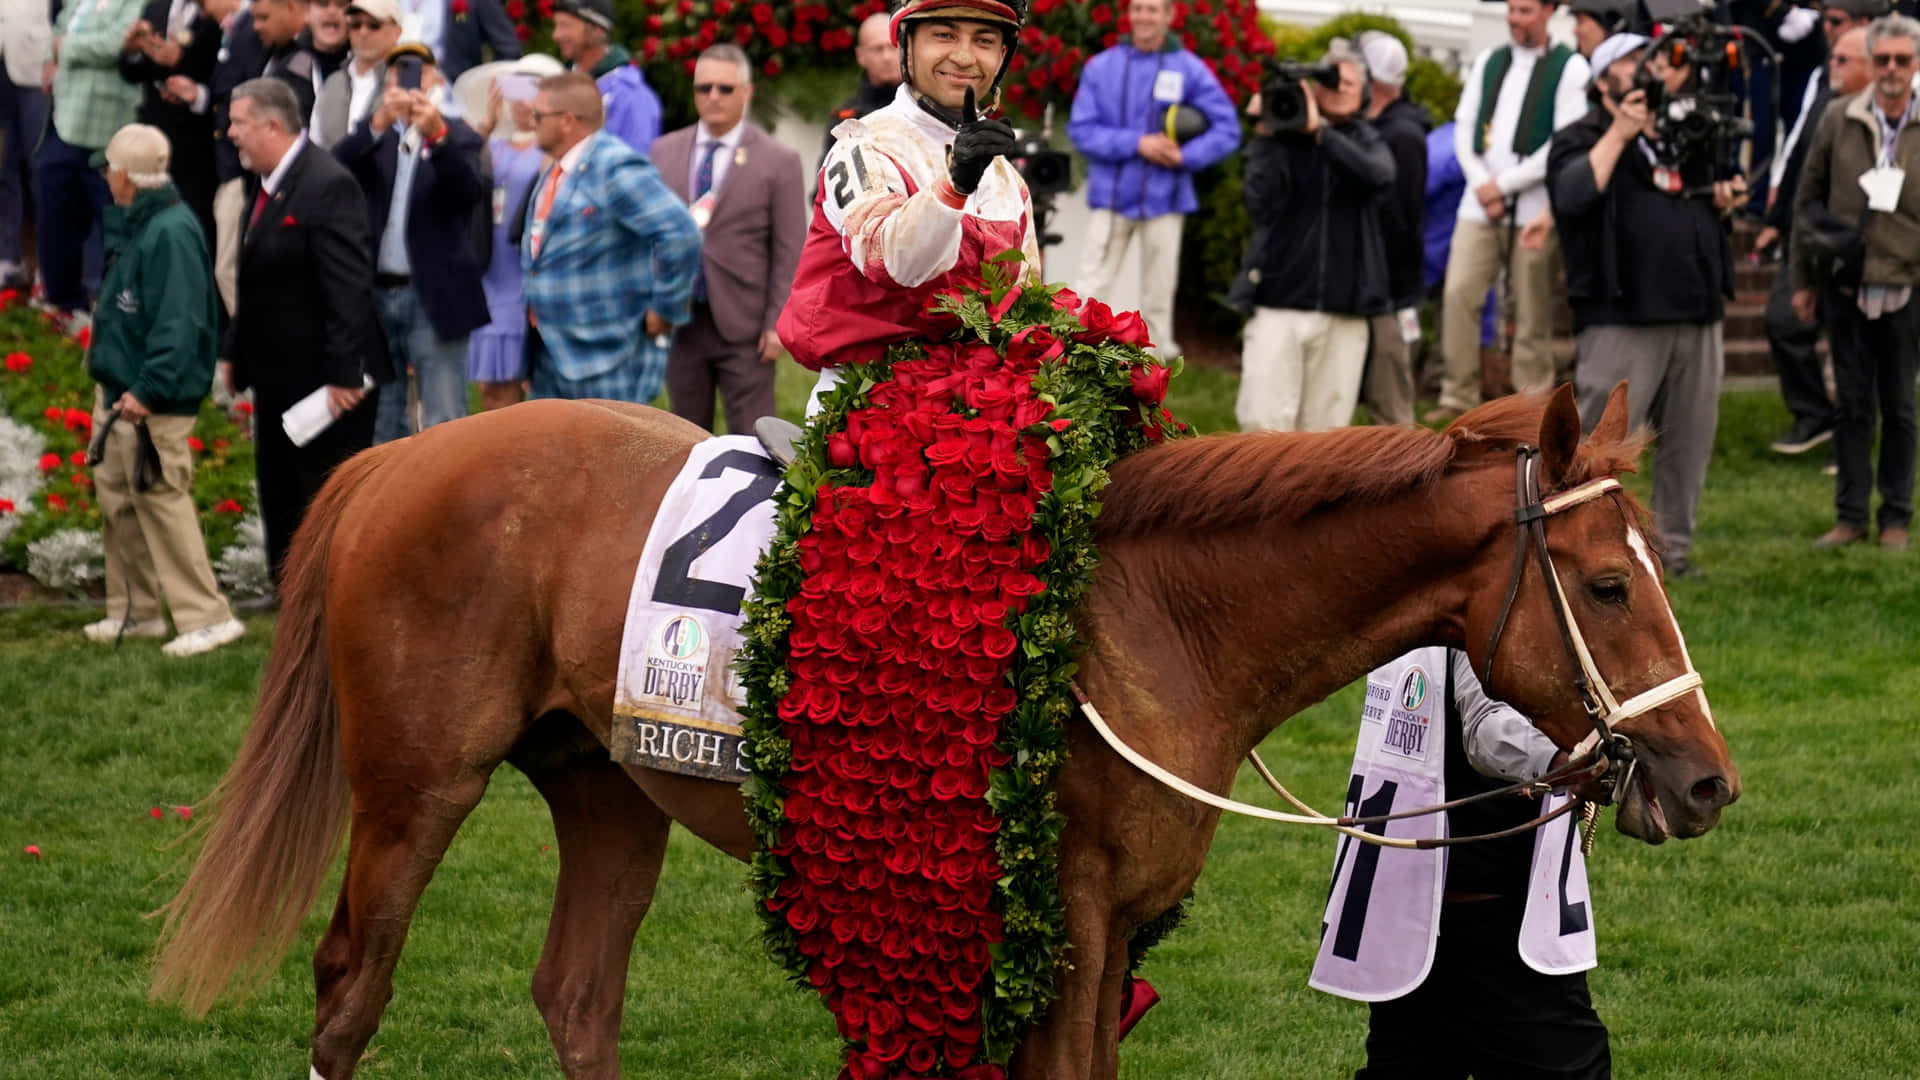 A Jockey Is Riding A Horse With Flowers On It